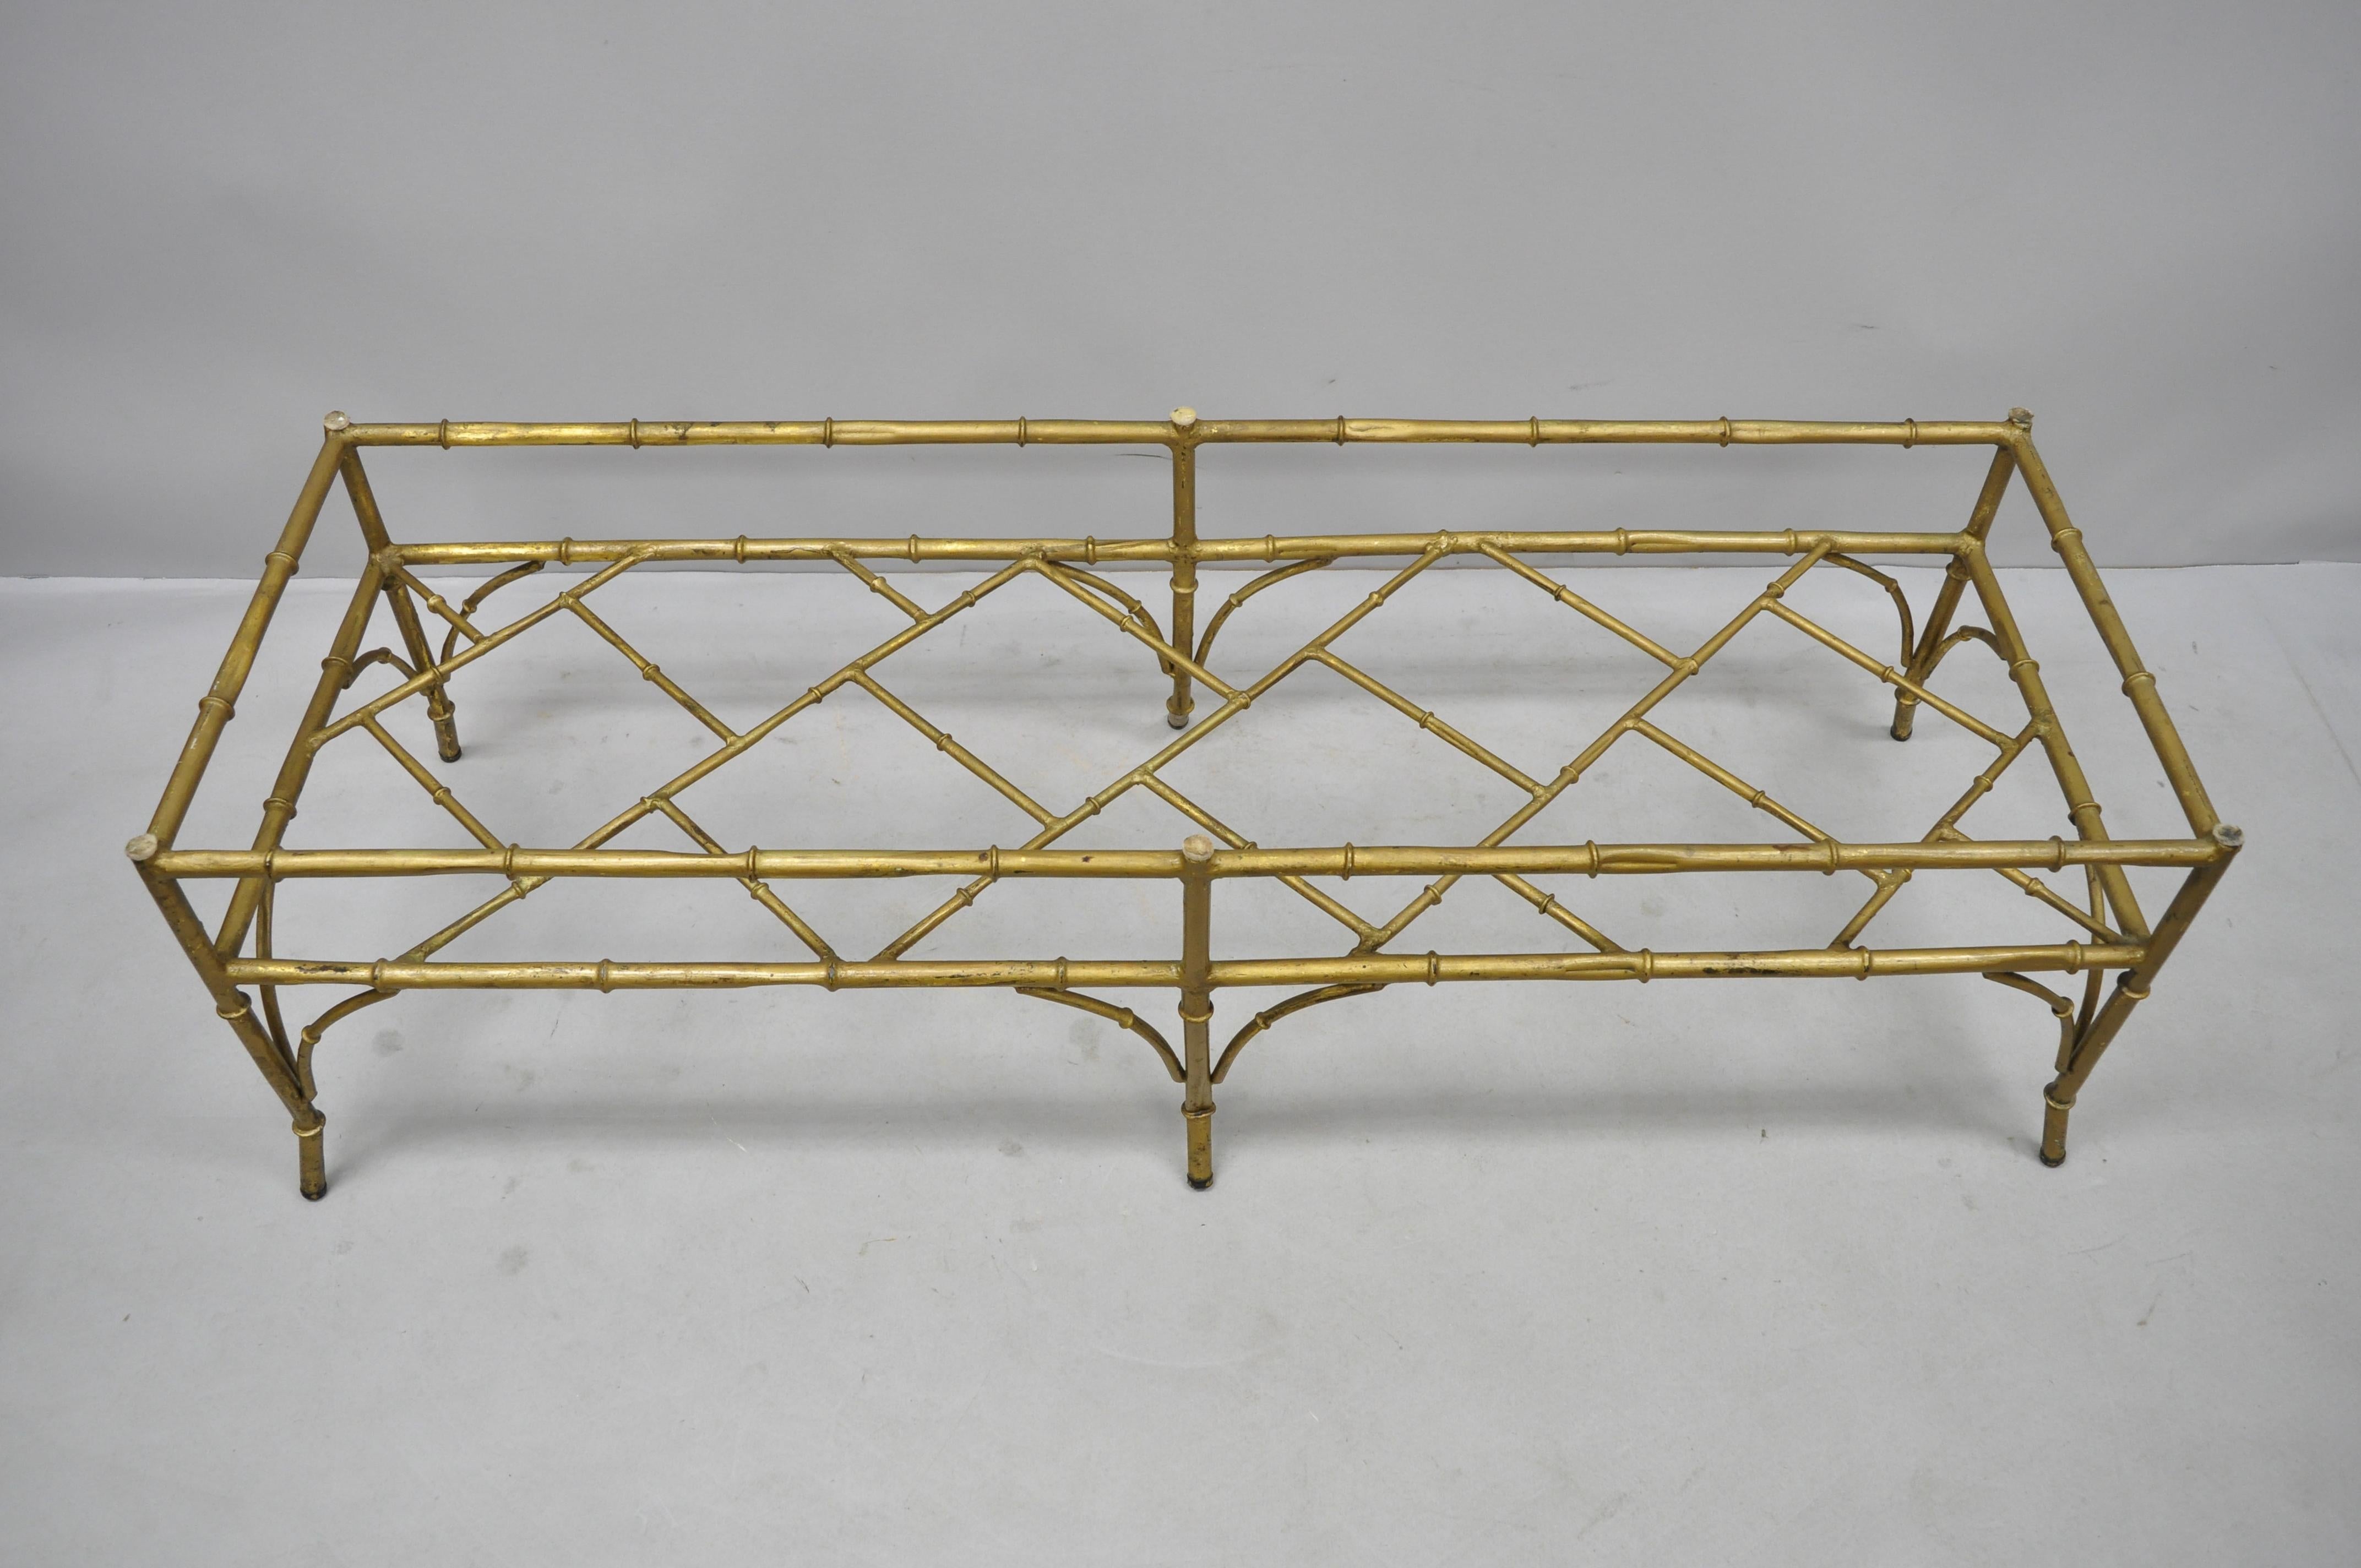 Vintage Italian Hollywood Regency faux bamboo lattice gold coffee table base. Item features faux bamboo lattice design, angled legs, gold painted finish, iron construction, great style and form, great to re-paint and add glass top, circa mid-20th